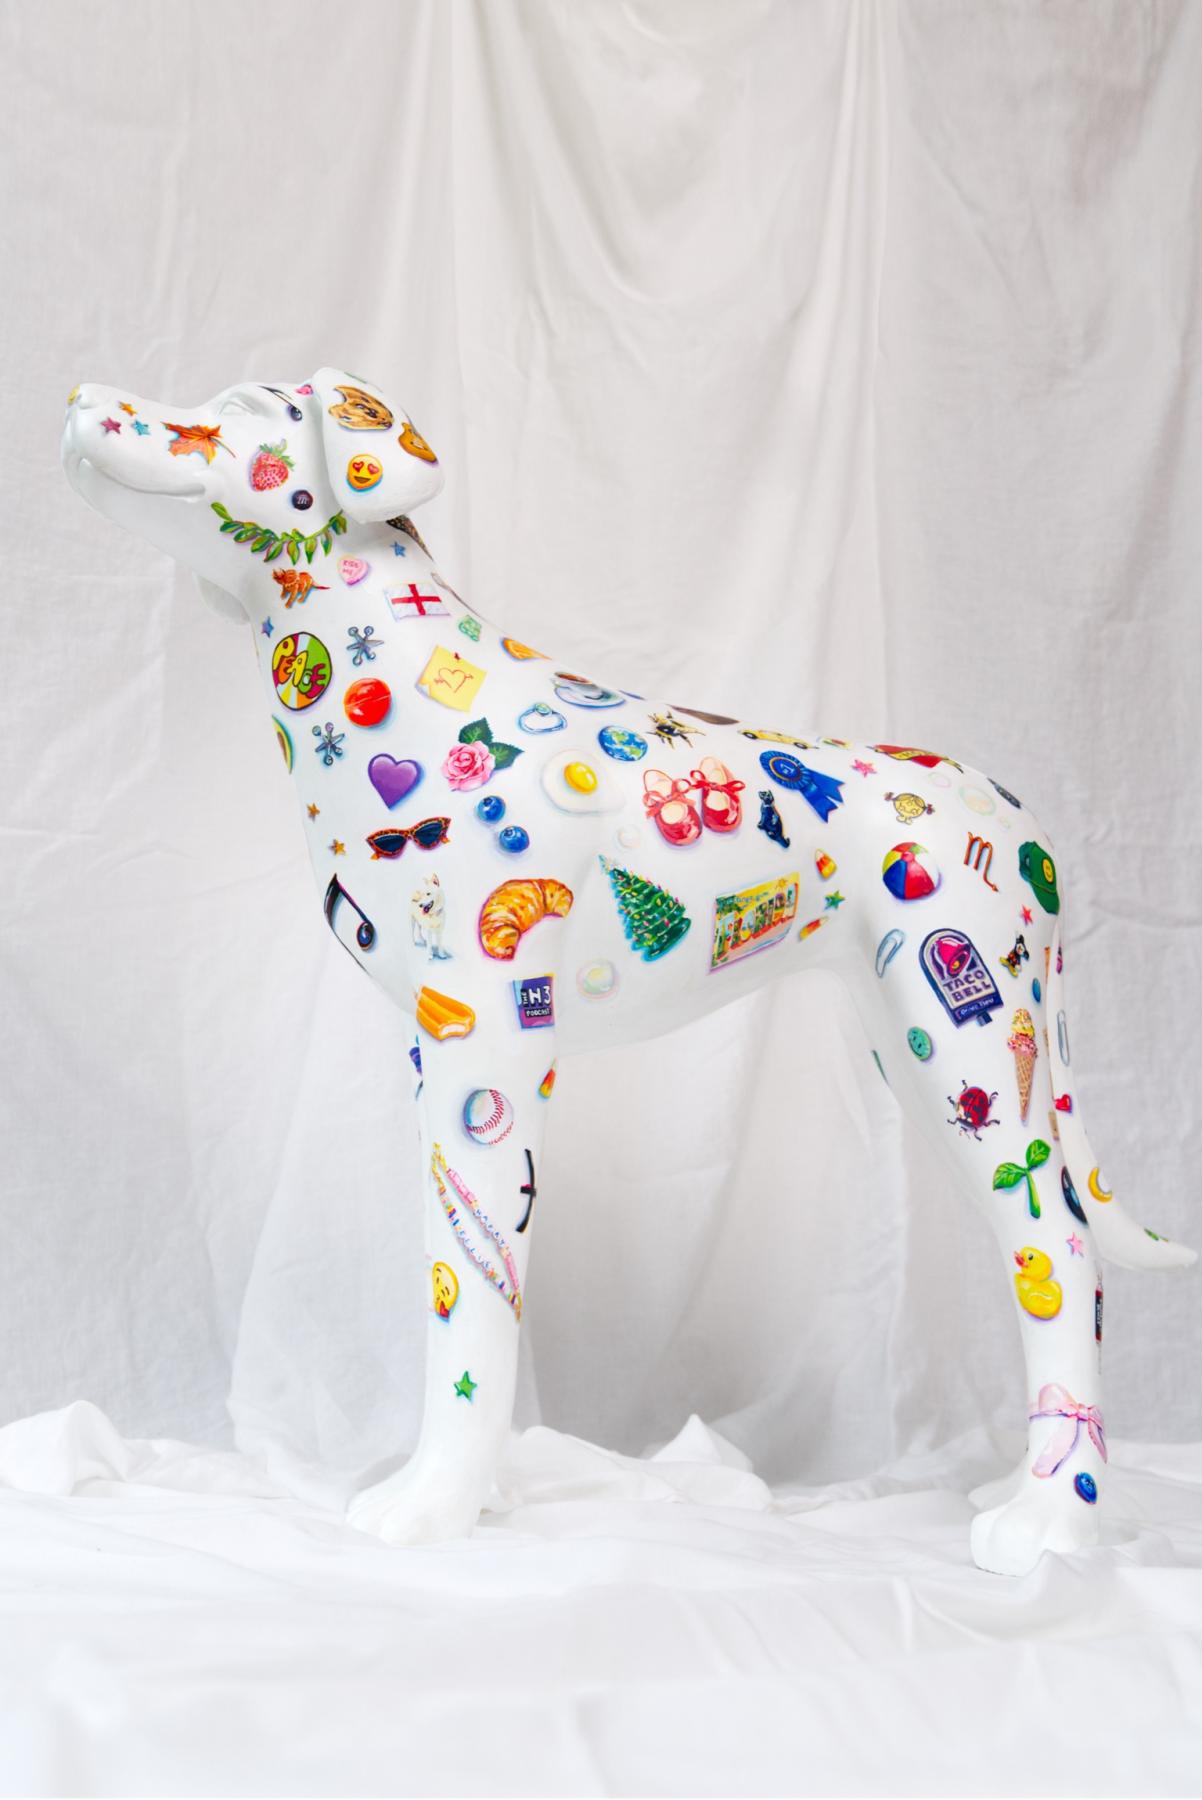 A white dog sculpture painted with dozens of tiny little objects, such as hearts, fruit, plants, logos, toys, etc. 